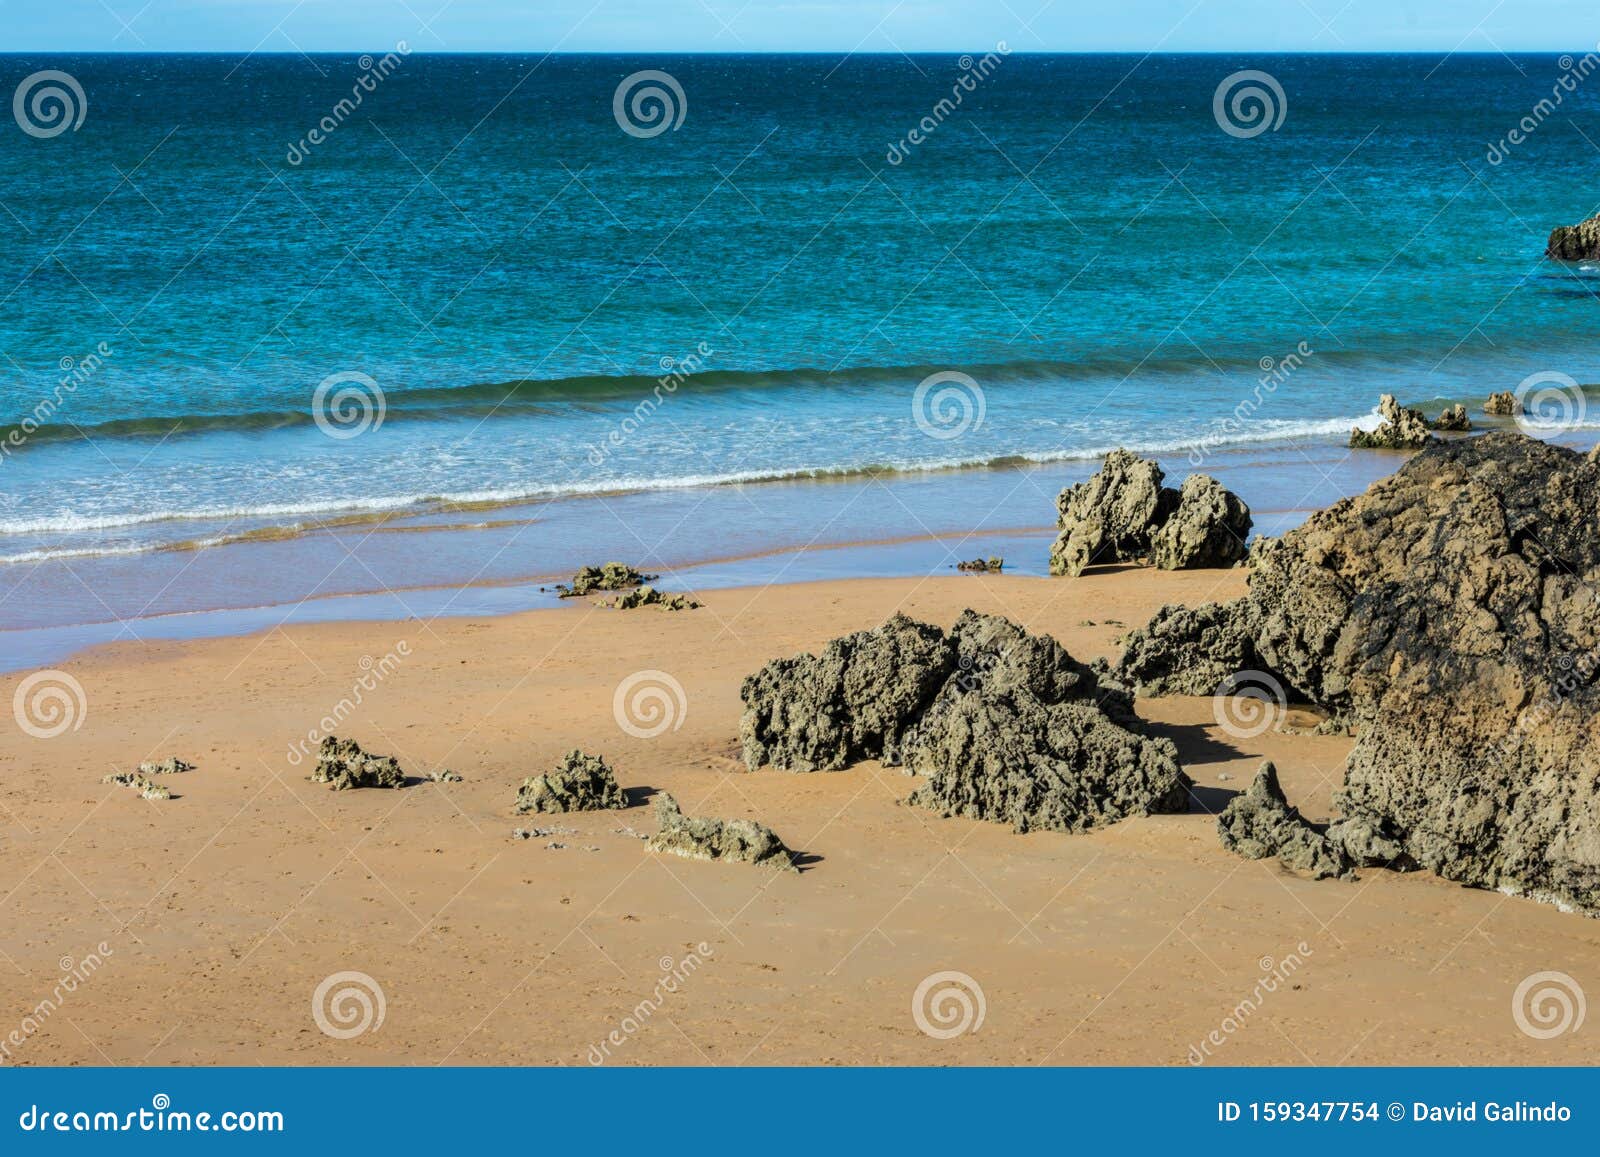 view of the beach with rocks and sand between cliffs